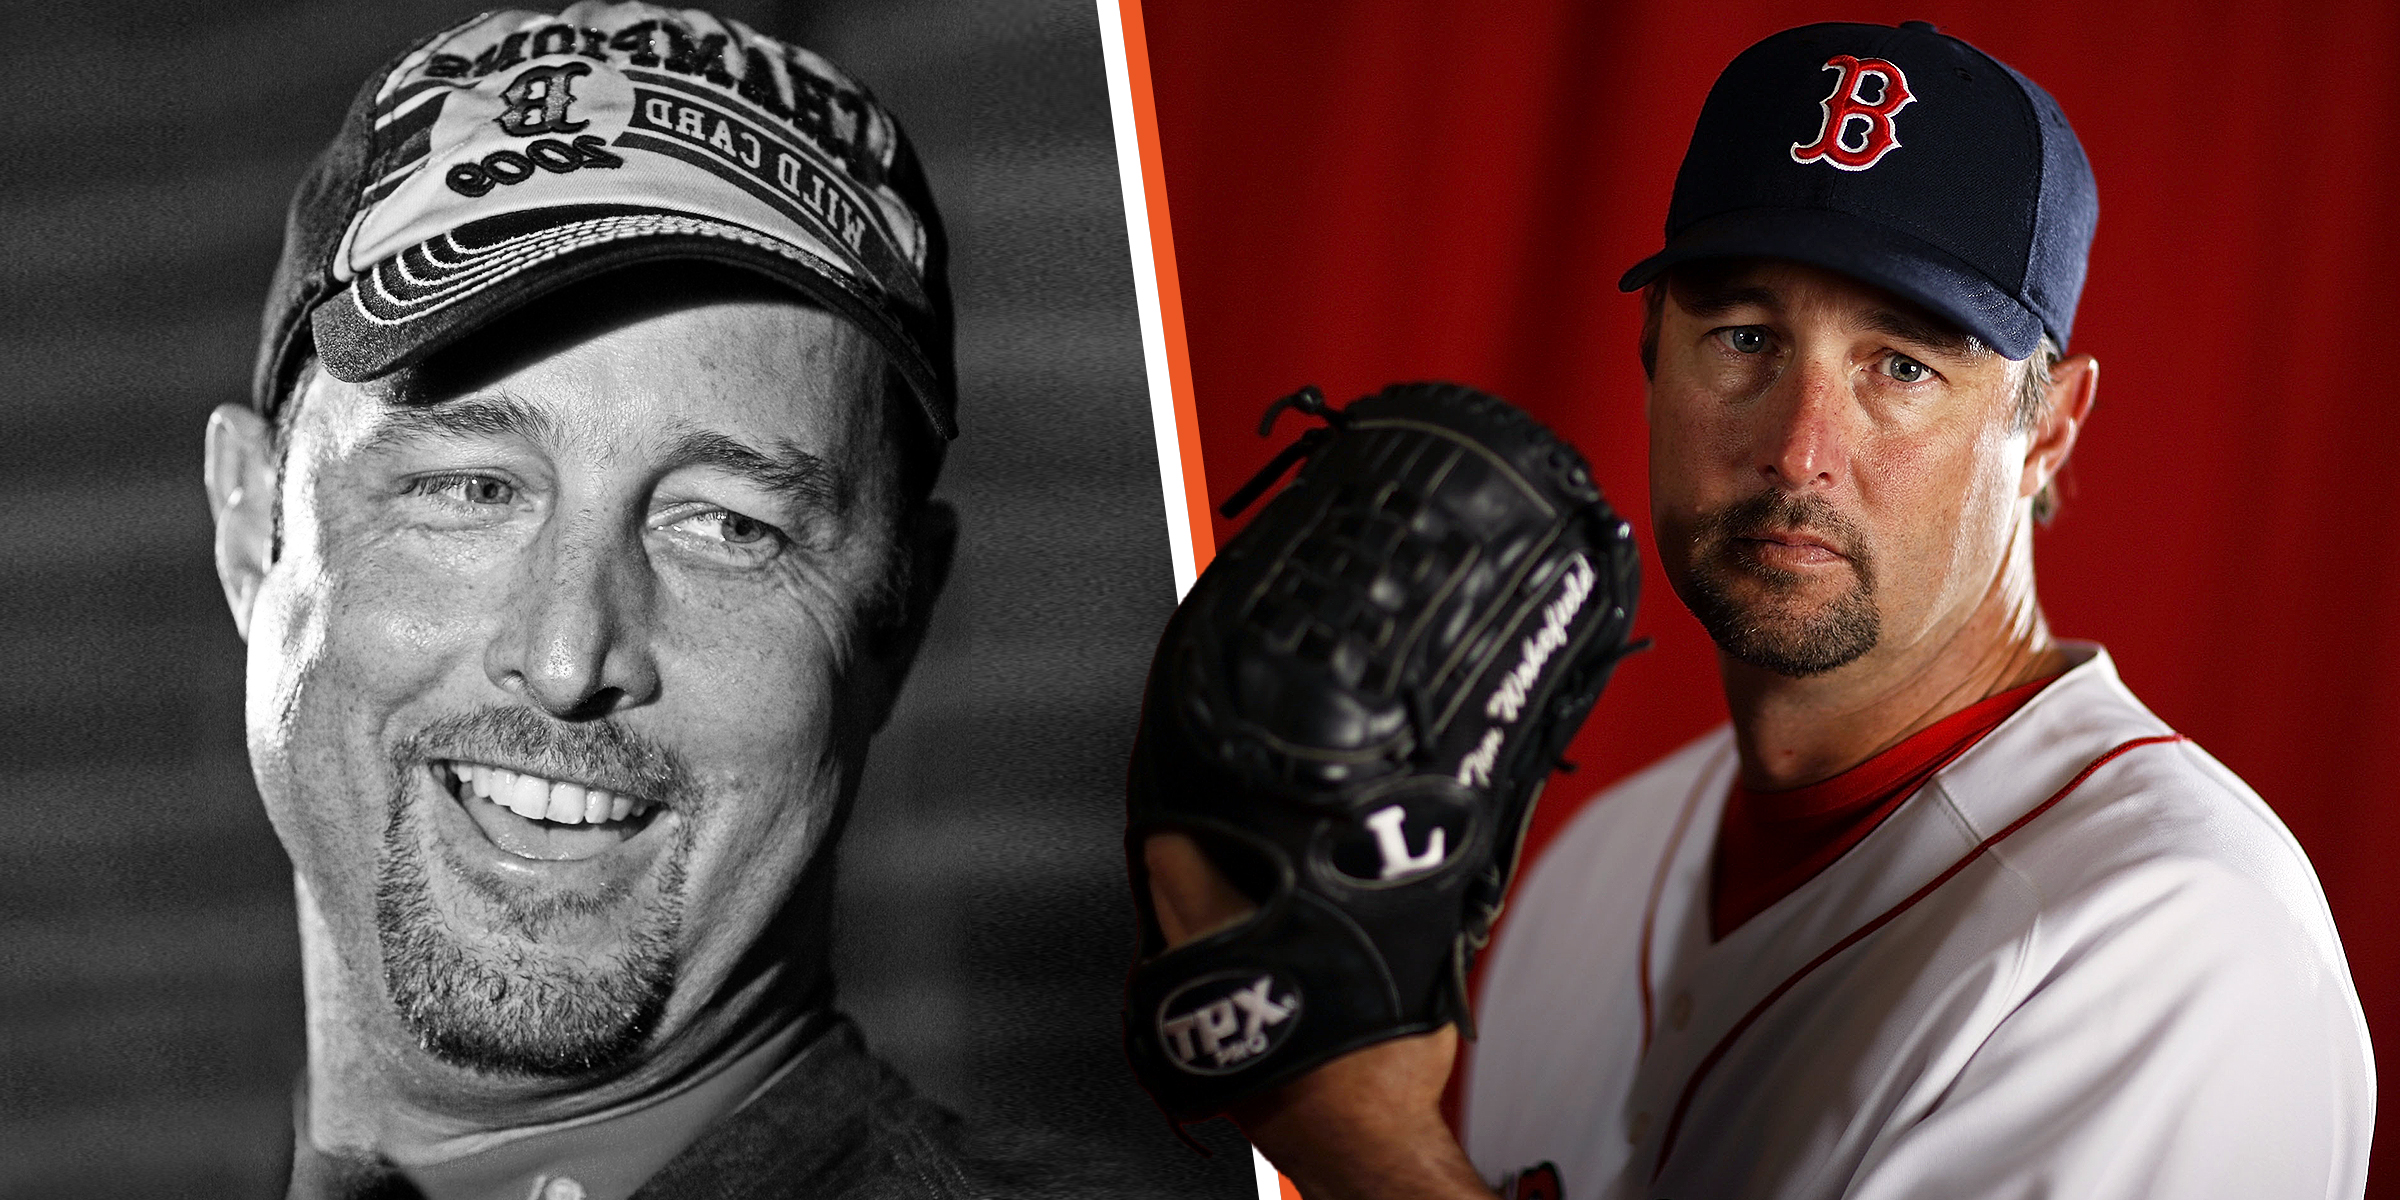 Tim Wakefield | Source : Getty Images